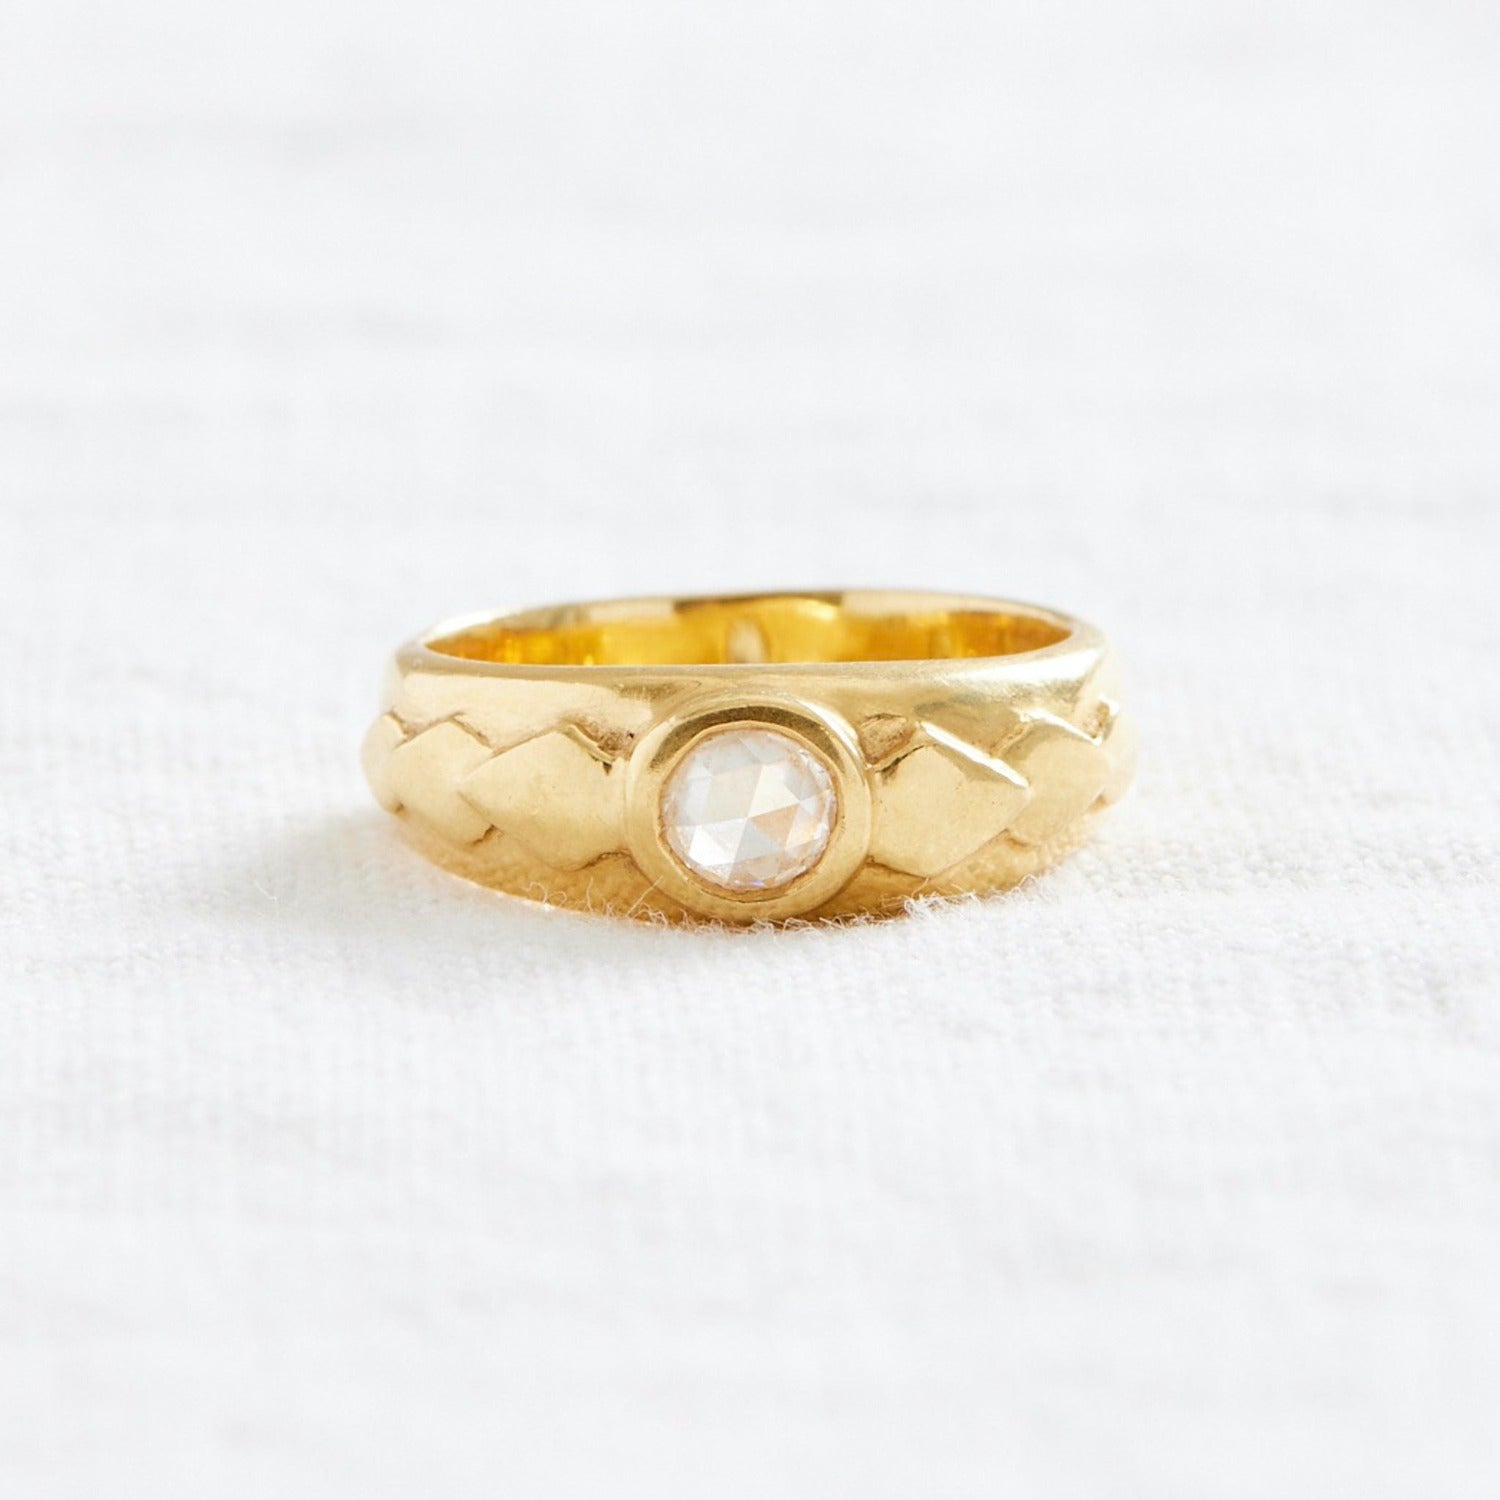 gold ring with diamond in the center, and three engraved leaves on either side of the diamond